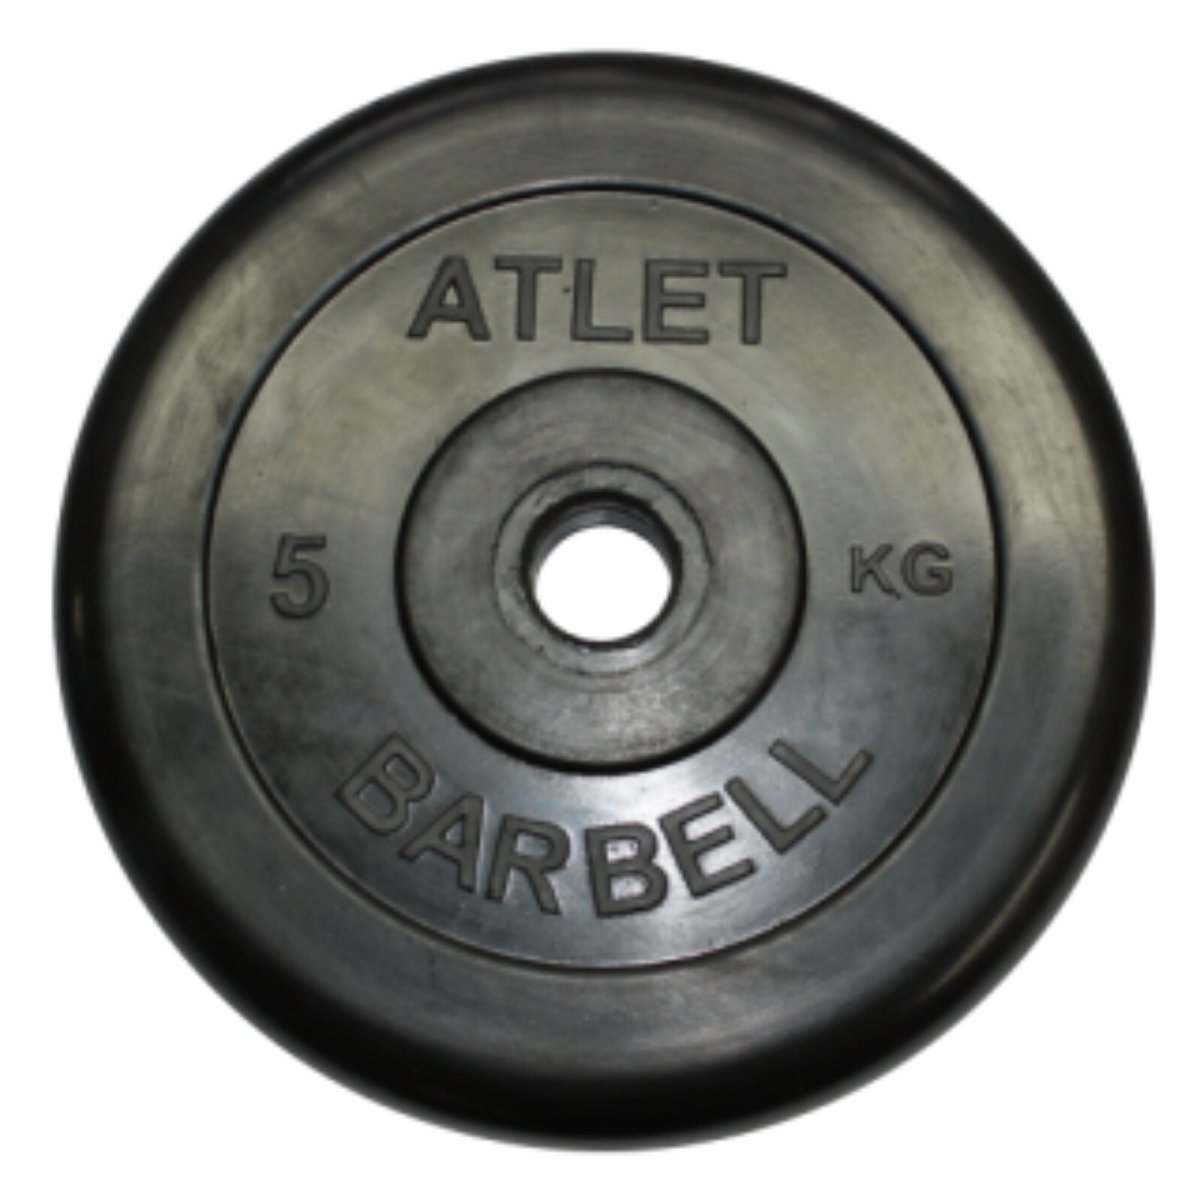 Диск MB Barbell MB-atletb26 5 кг